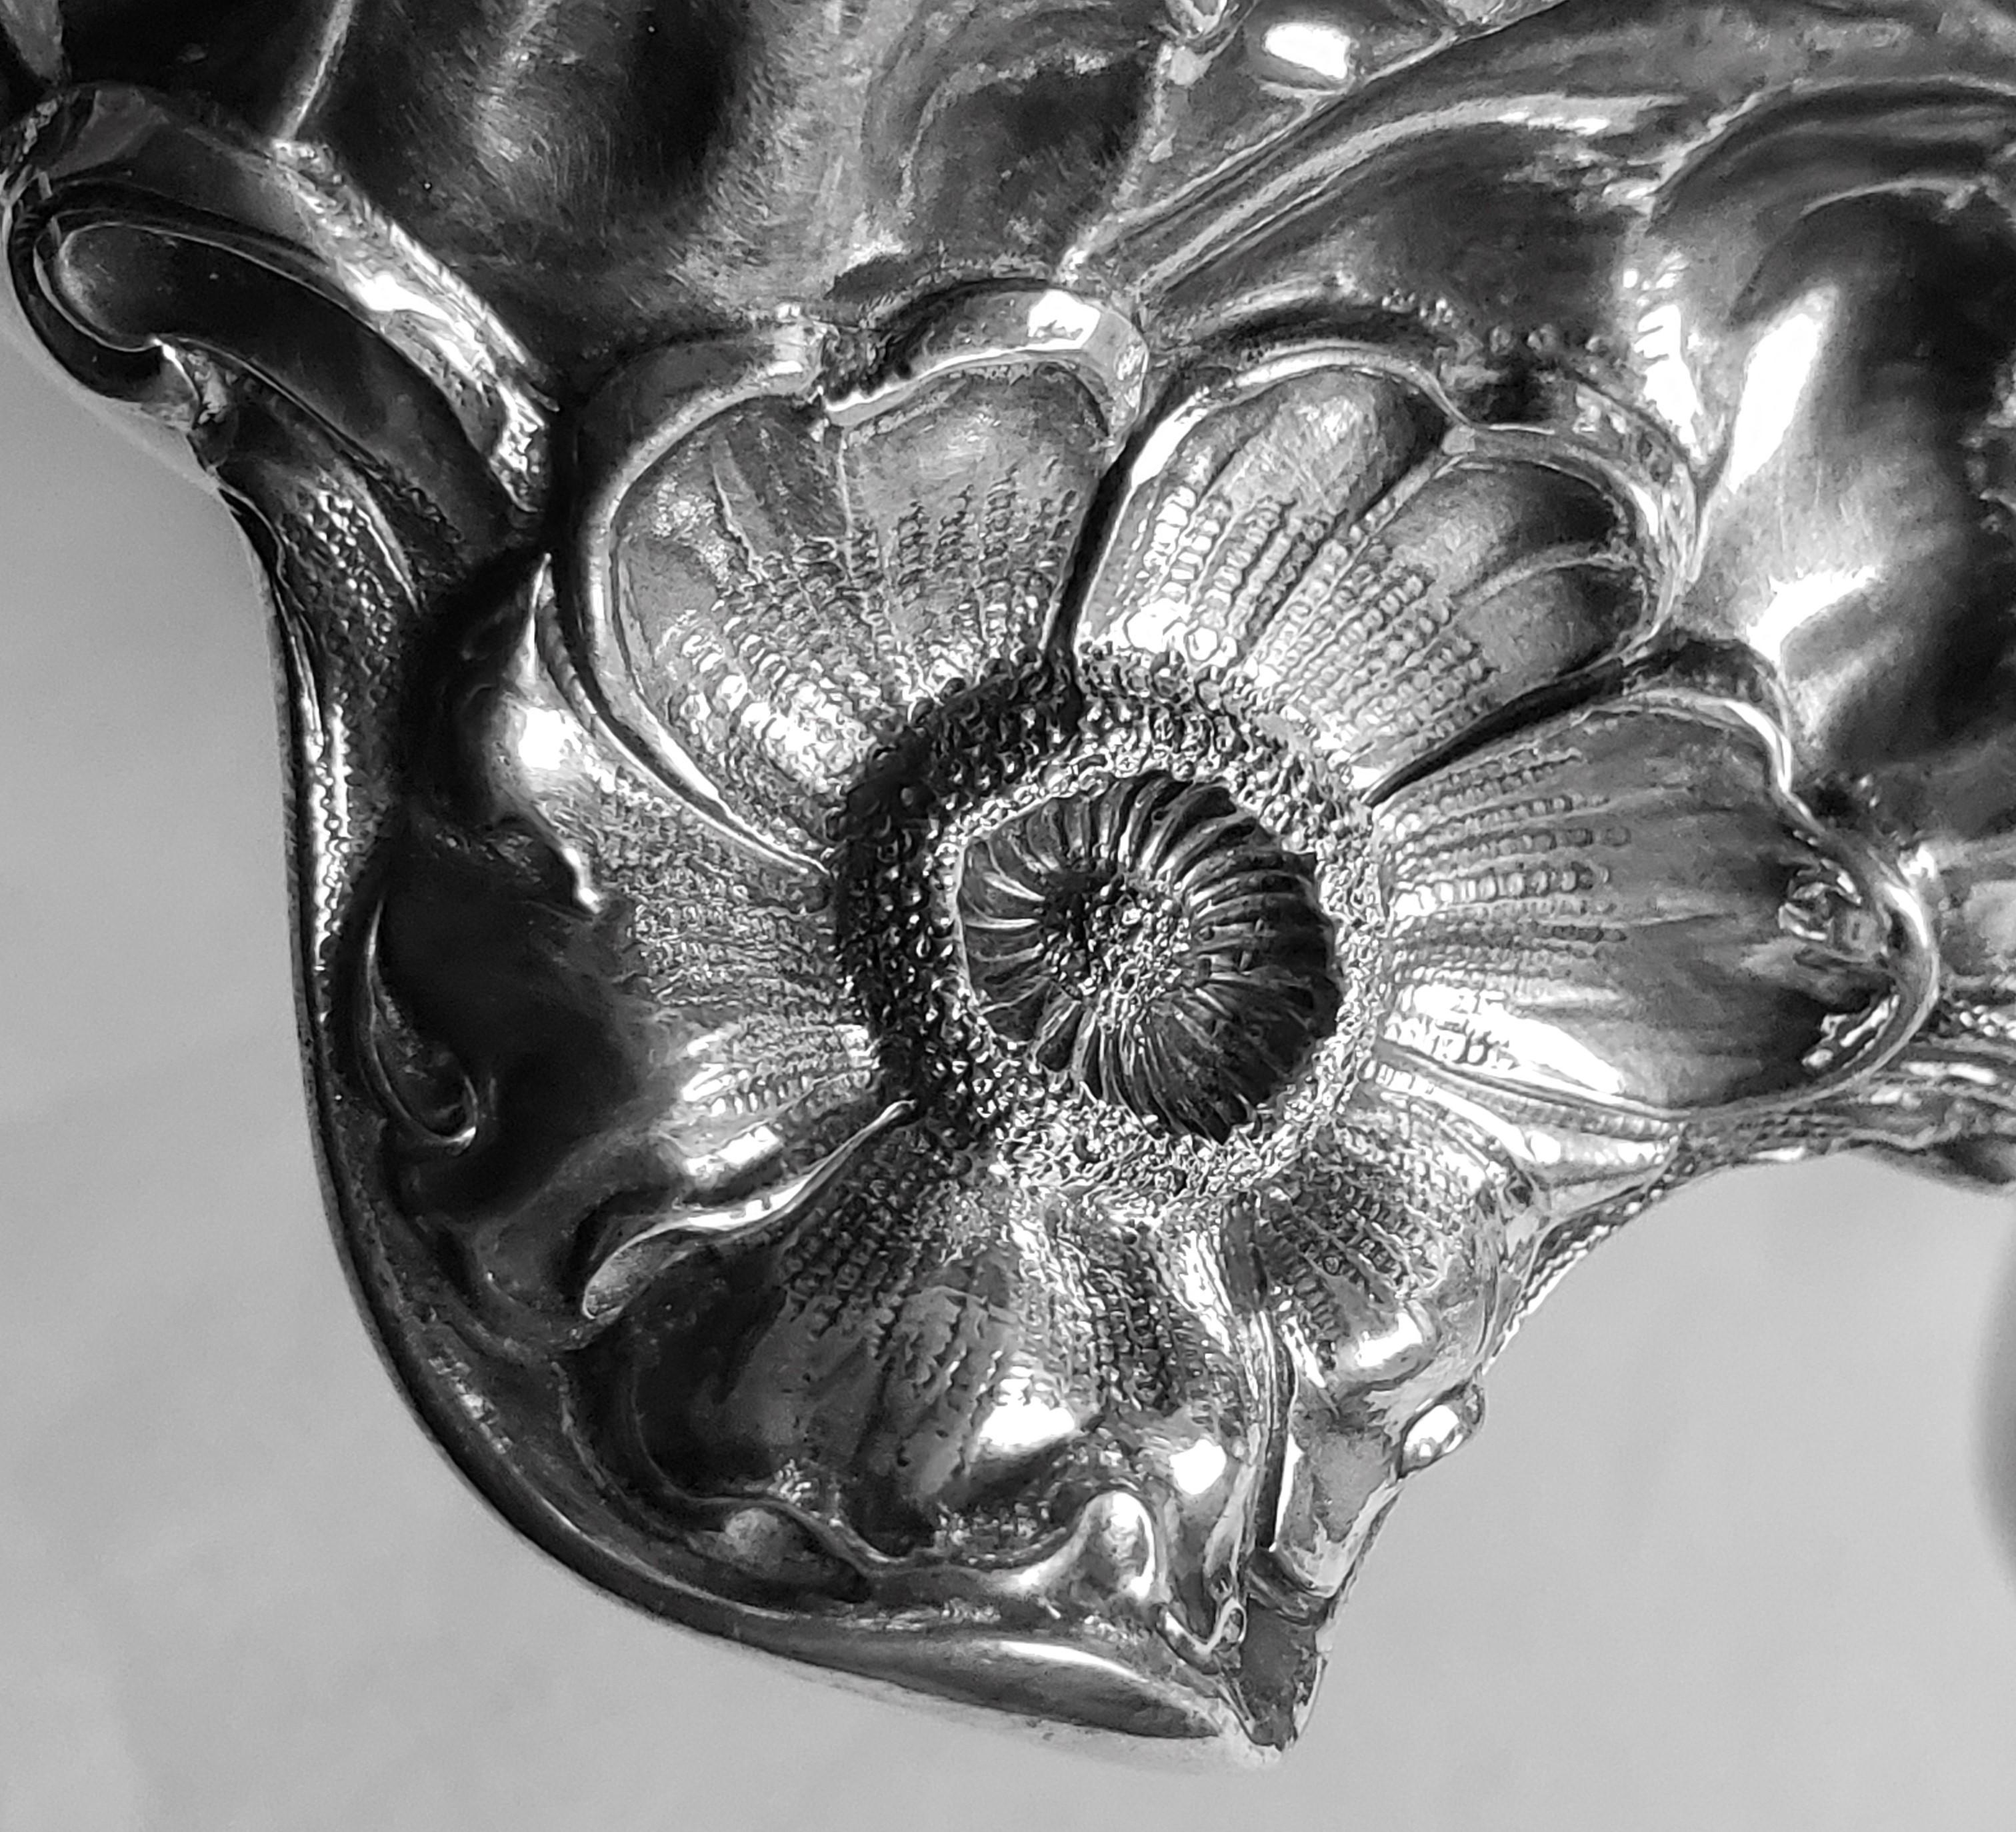 Antique Gorham Sterling Silver Bowl with Ornate Chased Floral Decoration For Sale 7